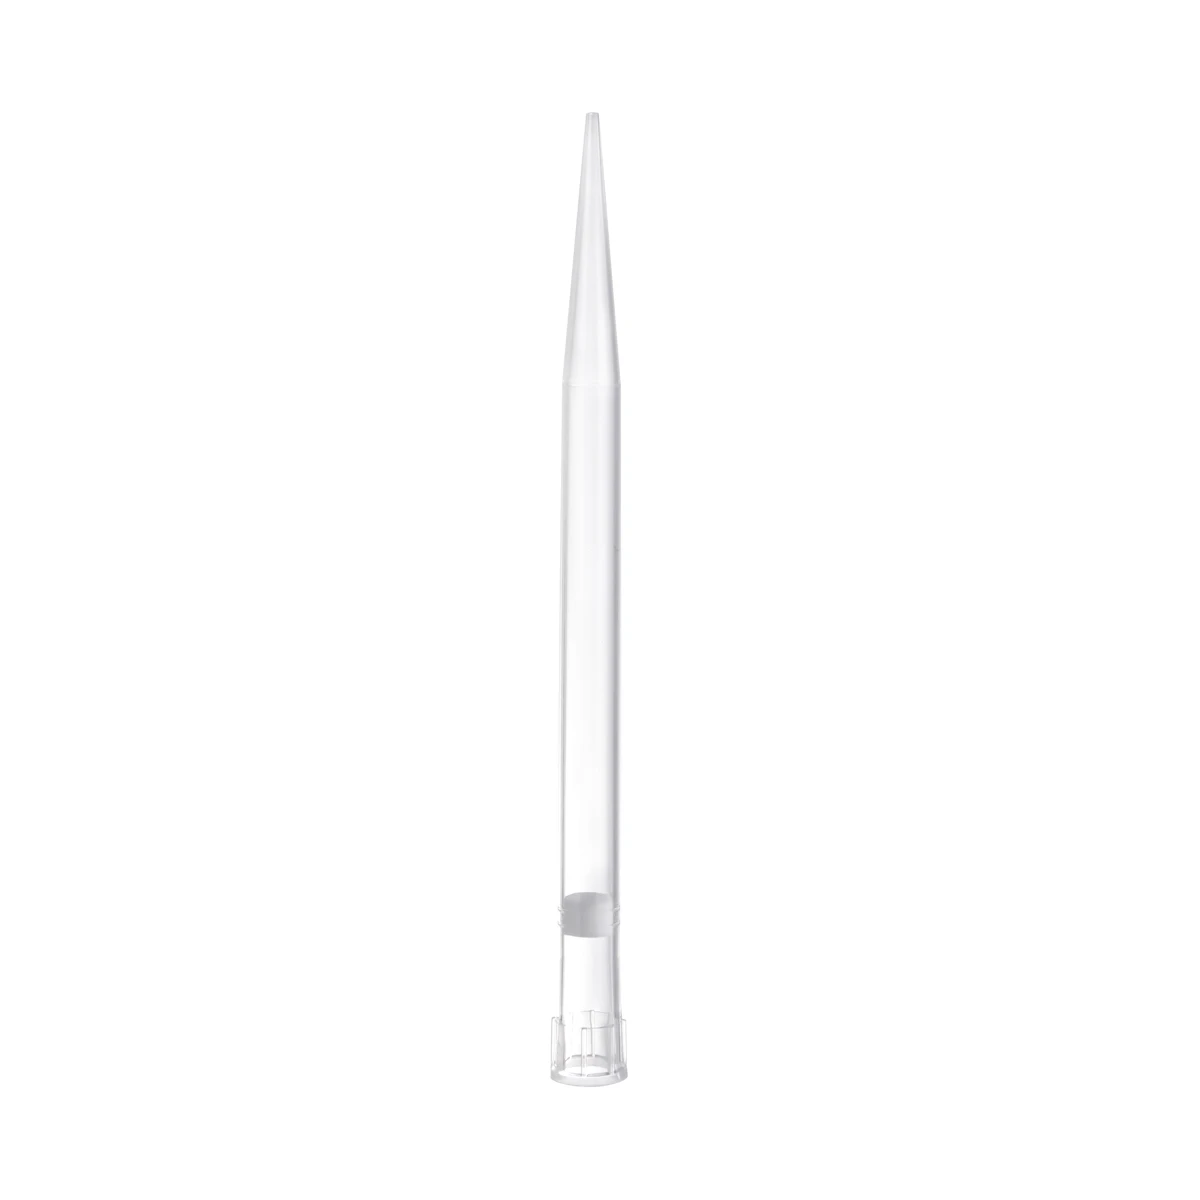 Disposable tecan 1000ul  Pipette tips with filter for laboratory experiment